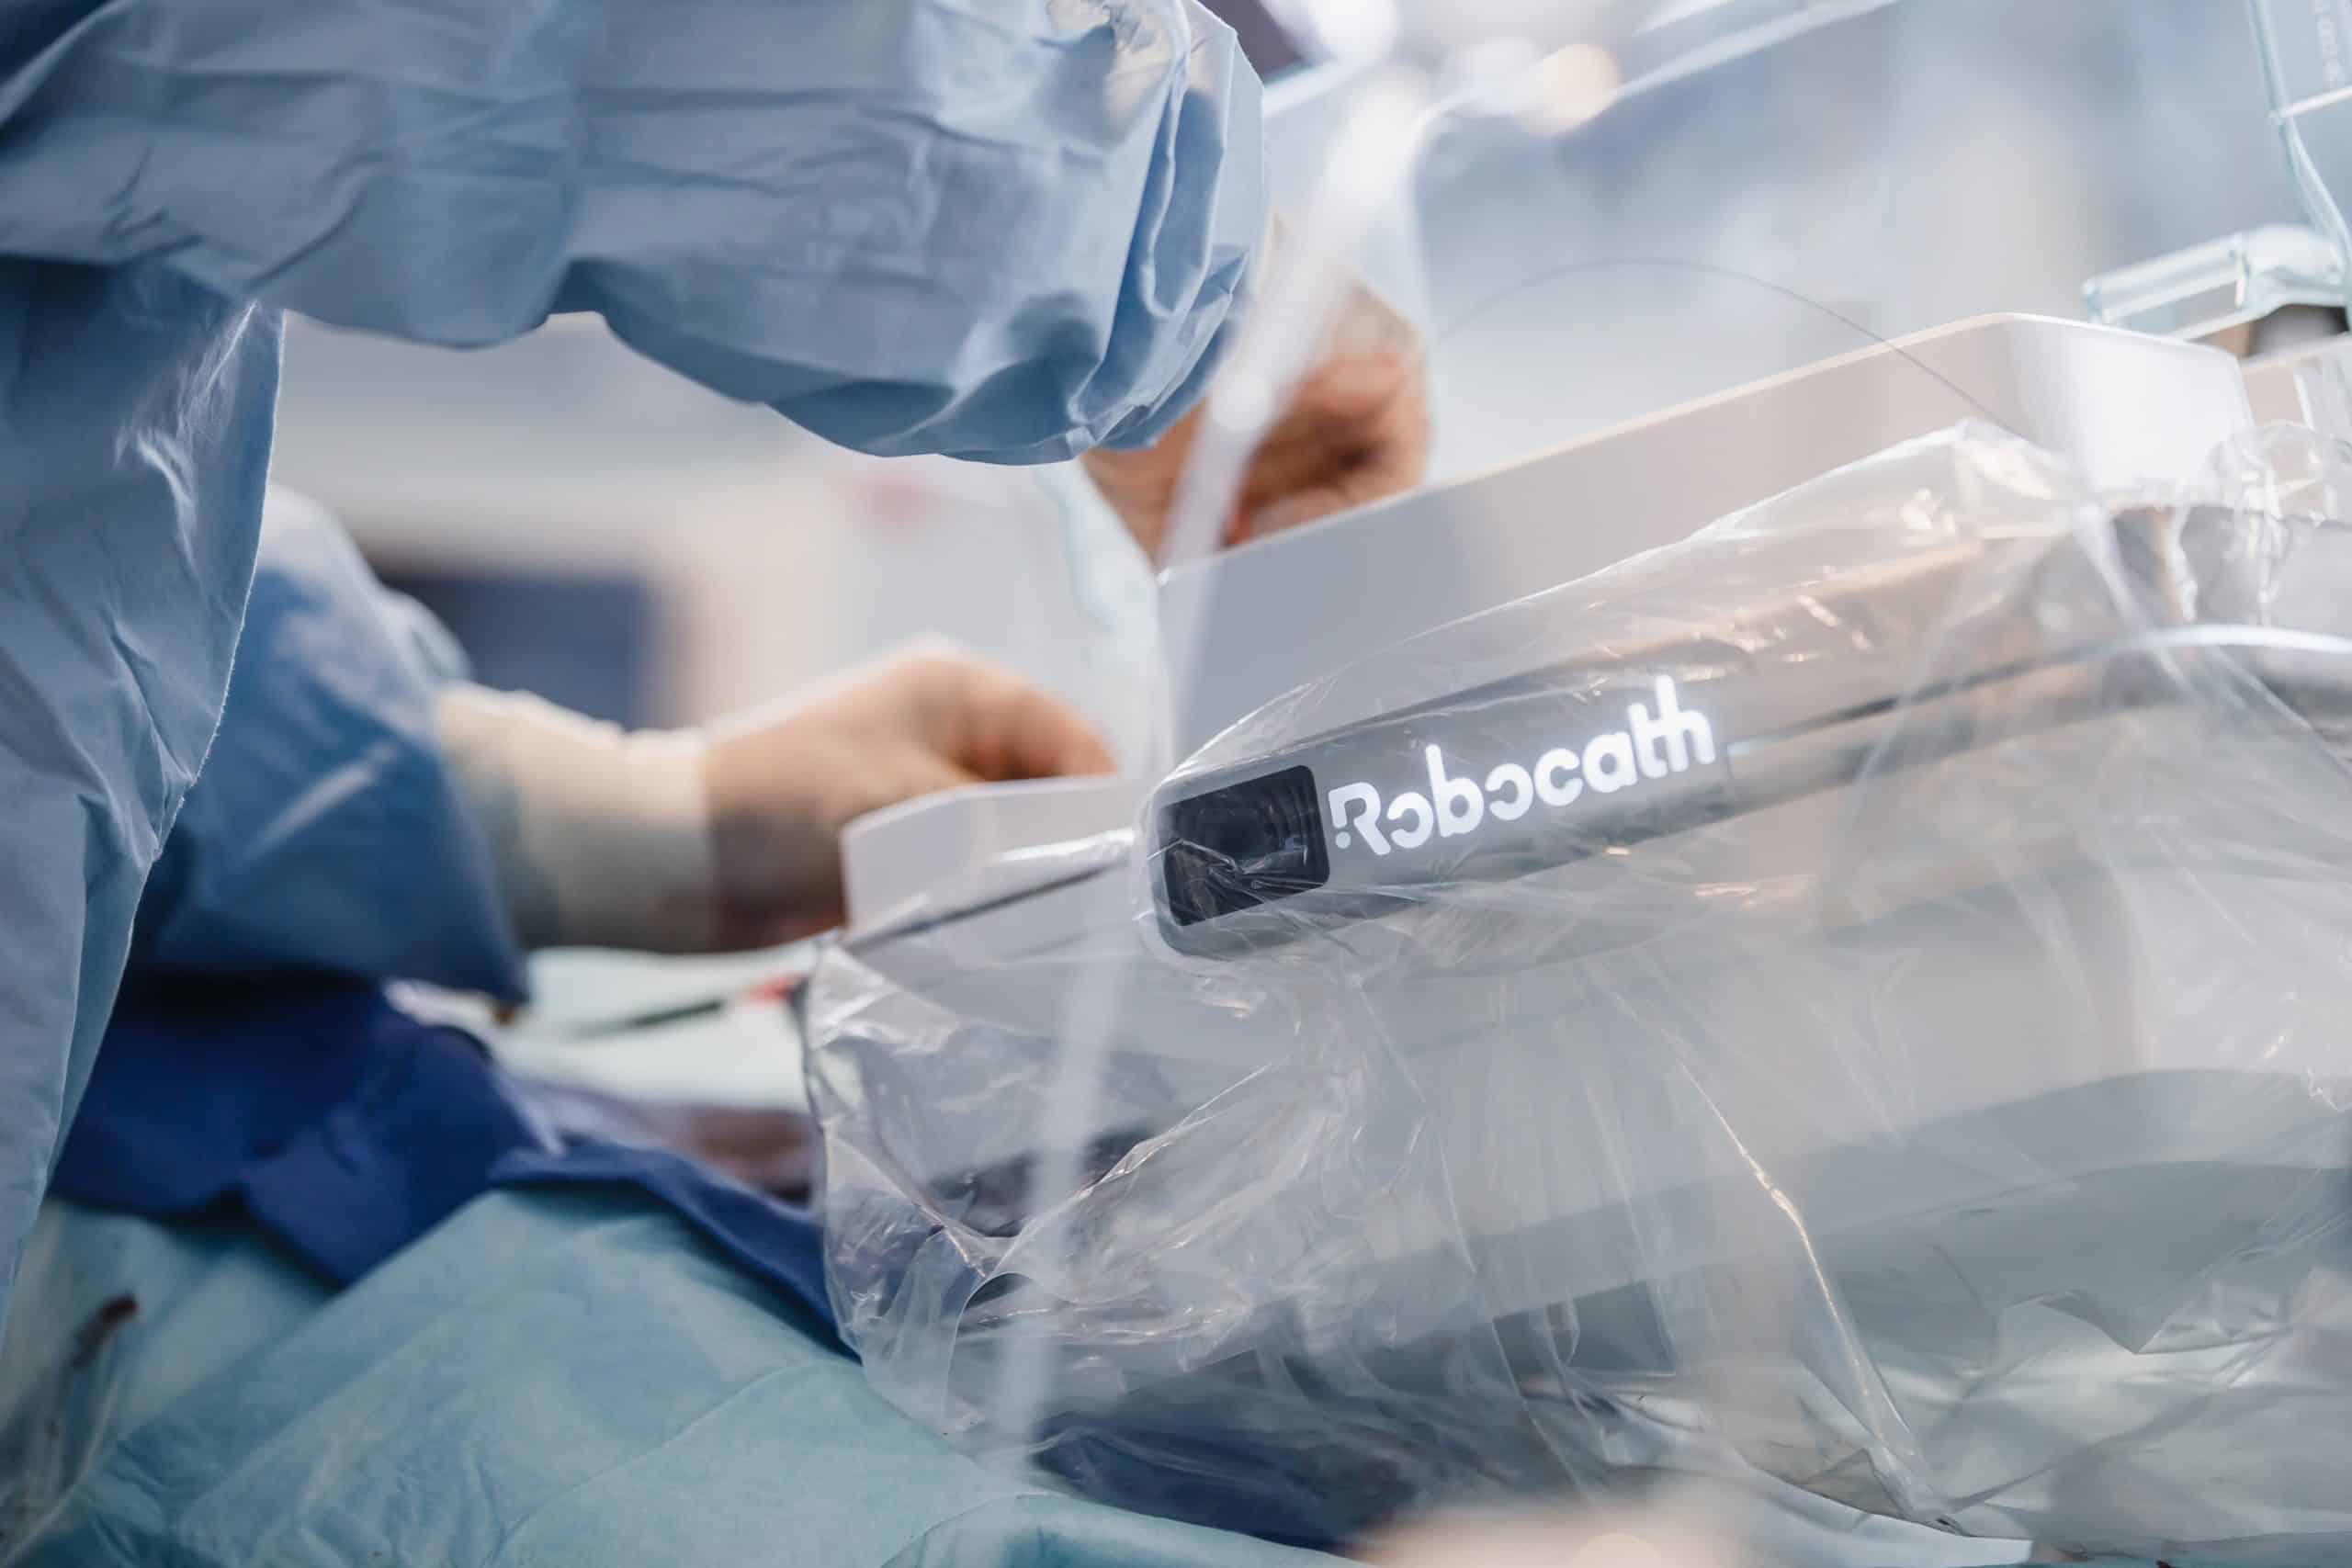 Robocath performs the first remote vascular-surgery procedure